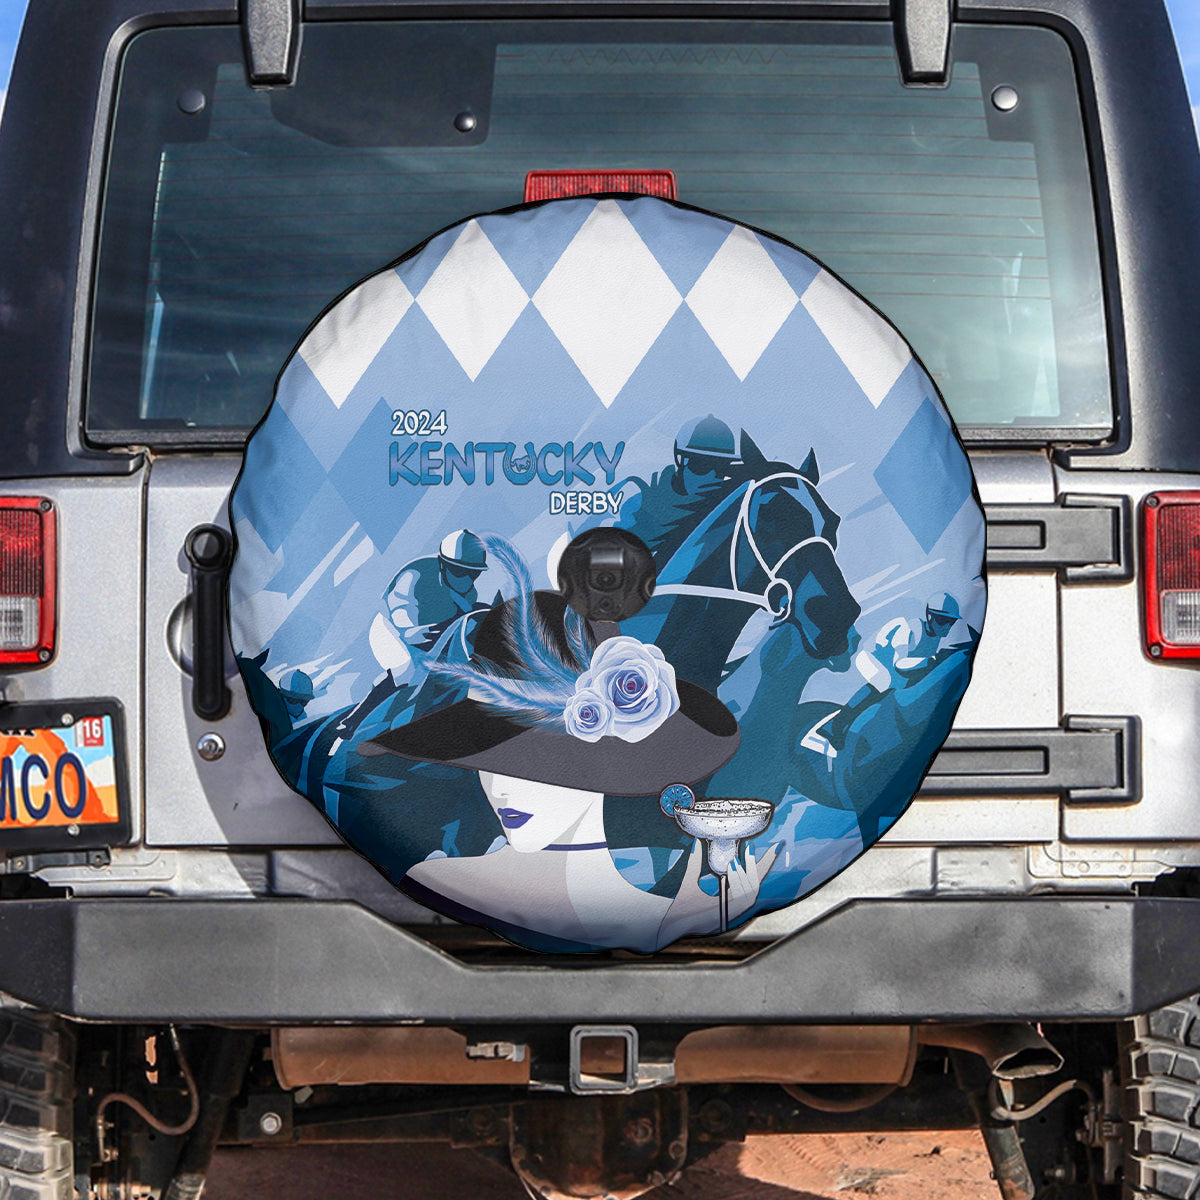 2024 Kentucky Horse Racing Spare Tire Cover Derby Mint Julep Girl - Blue Pastel